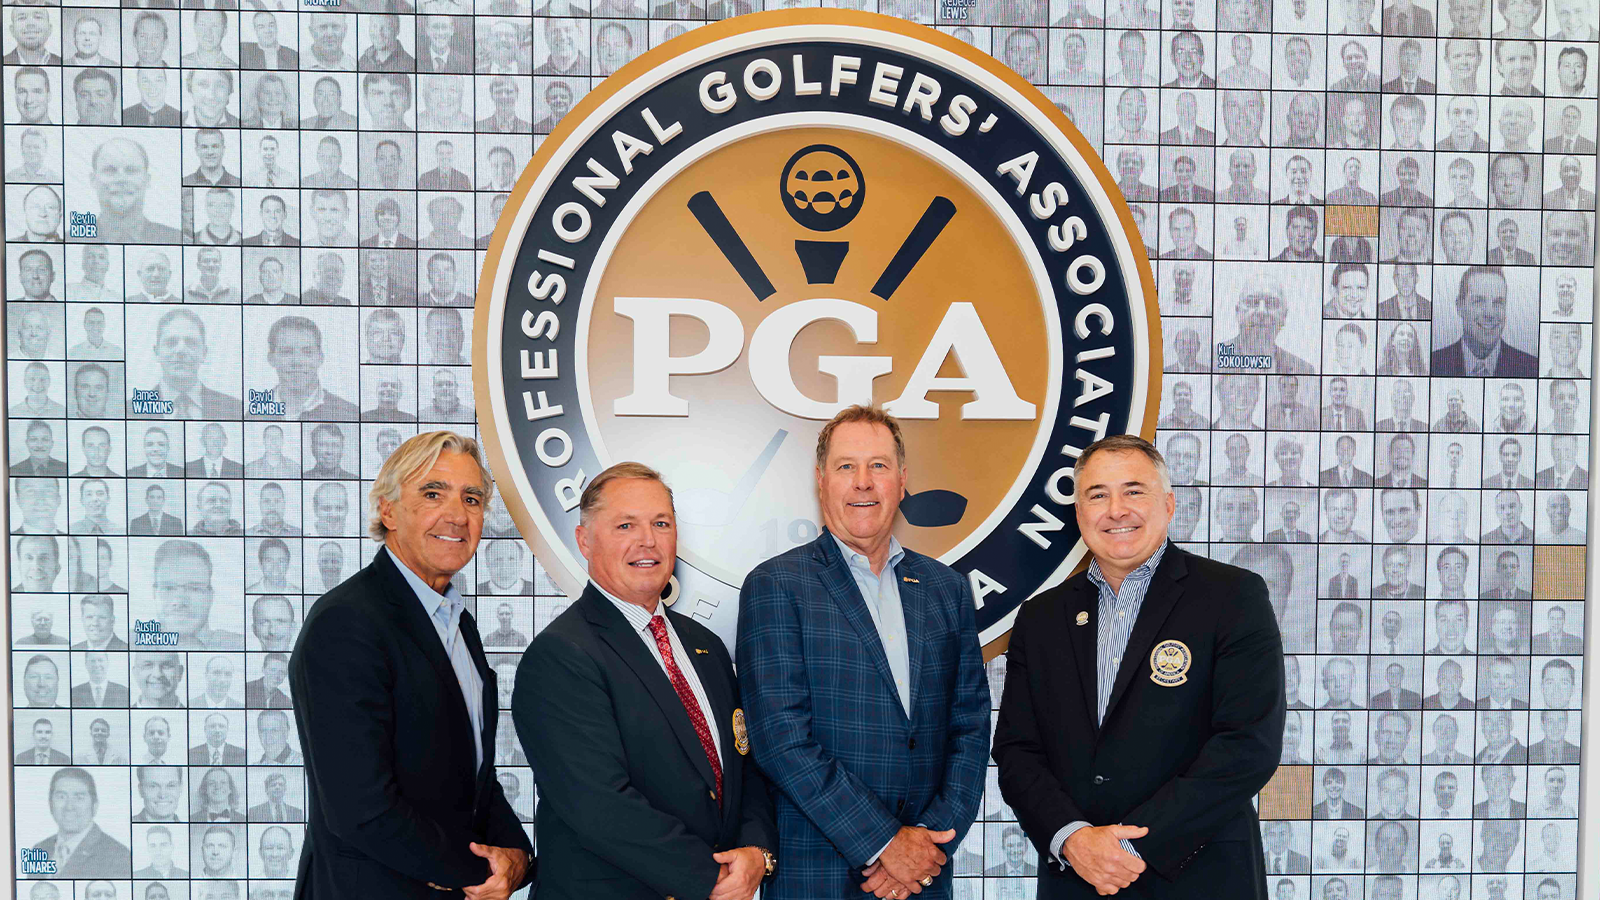 PGA of America CEO, Seth Waugh, PGA of America President, Jim Richerson, PGA of America Vice President, John Lindert PGA of America Secretary, Don Rea Jr. pose for a photo during the Welcome Home Celebration at PGA Frisco Campus on August 22, 2022 in Frisco, Texas. (Photo by Daryl Johnson/PGA of America)